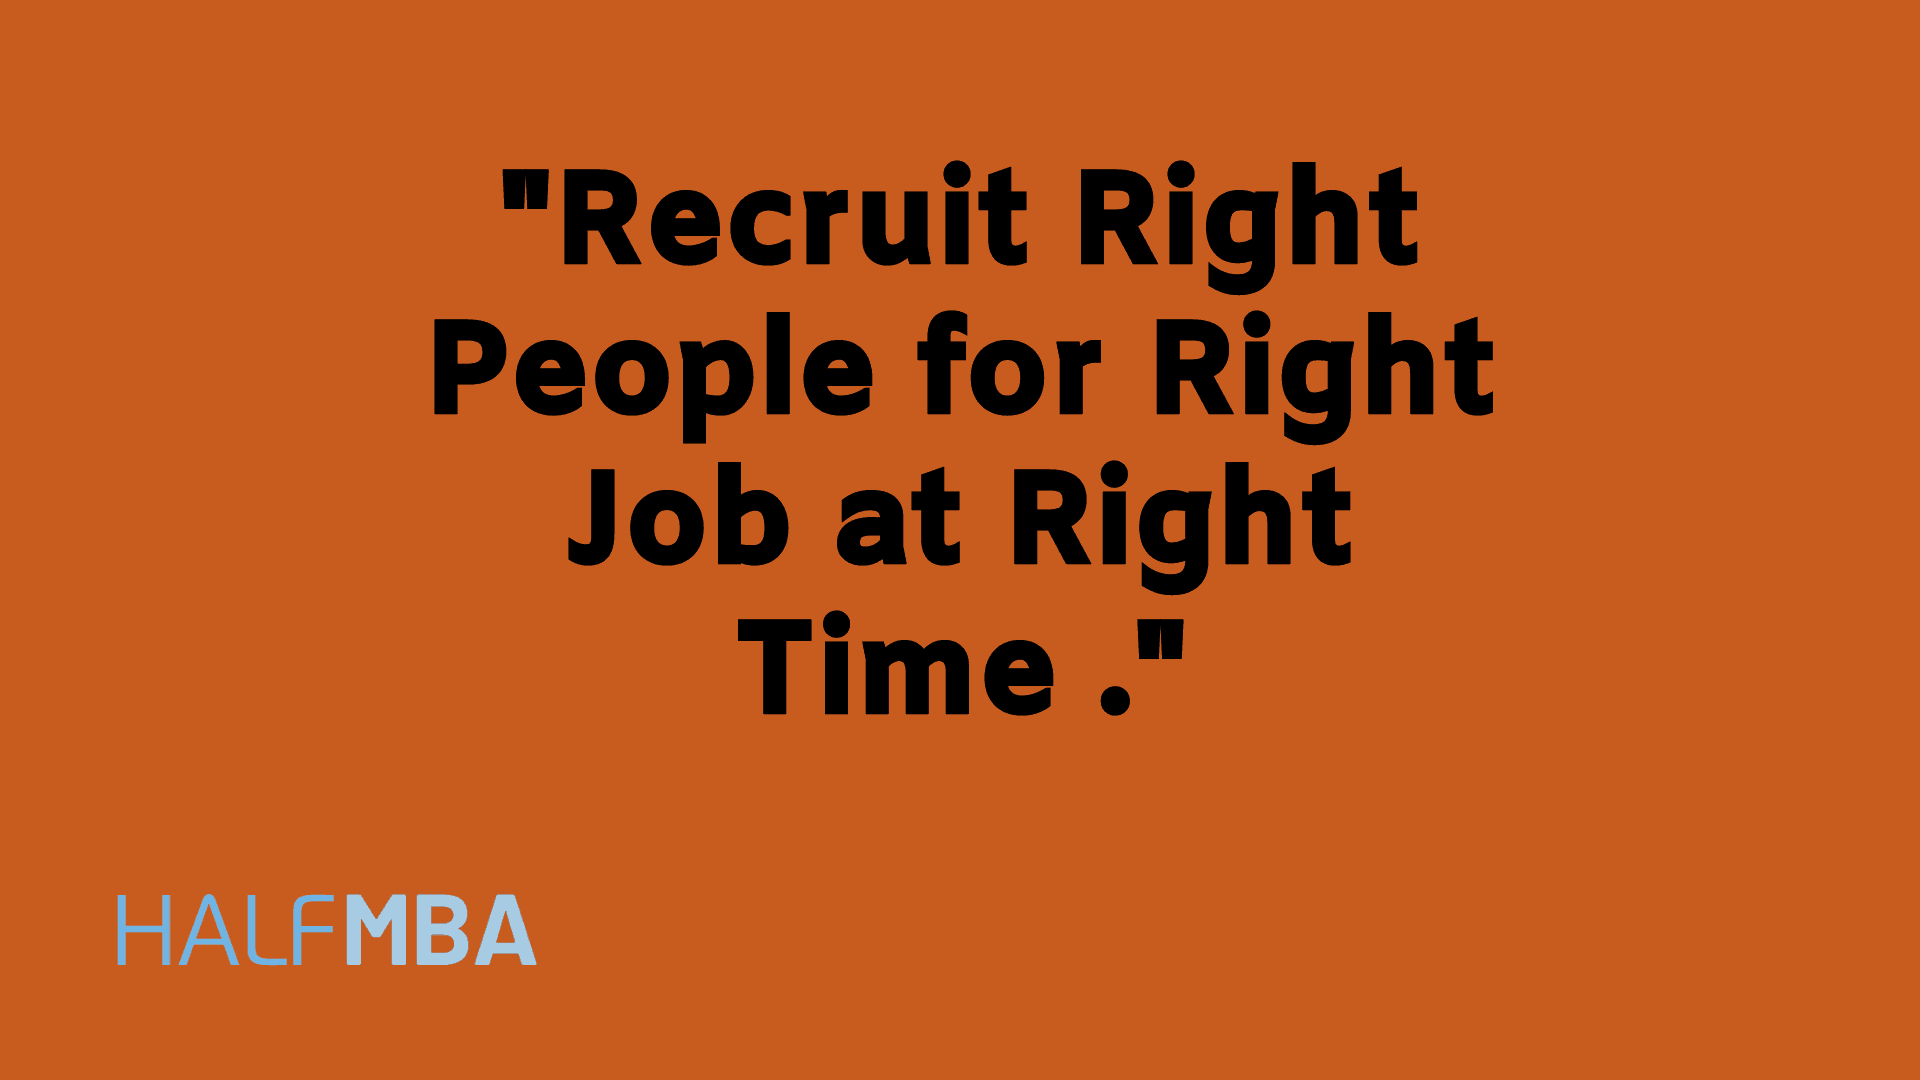 Recruit right people at right time for right work